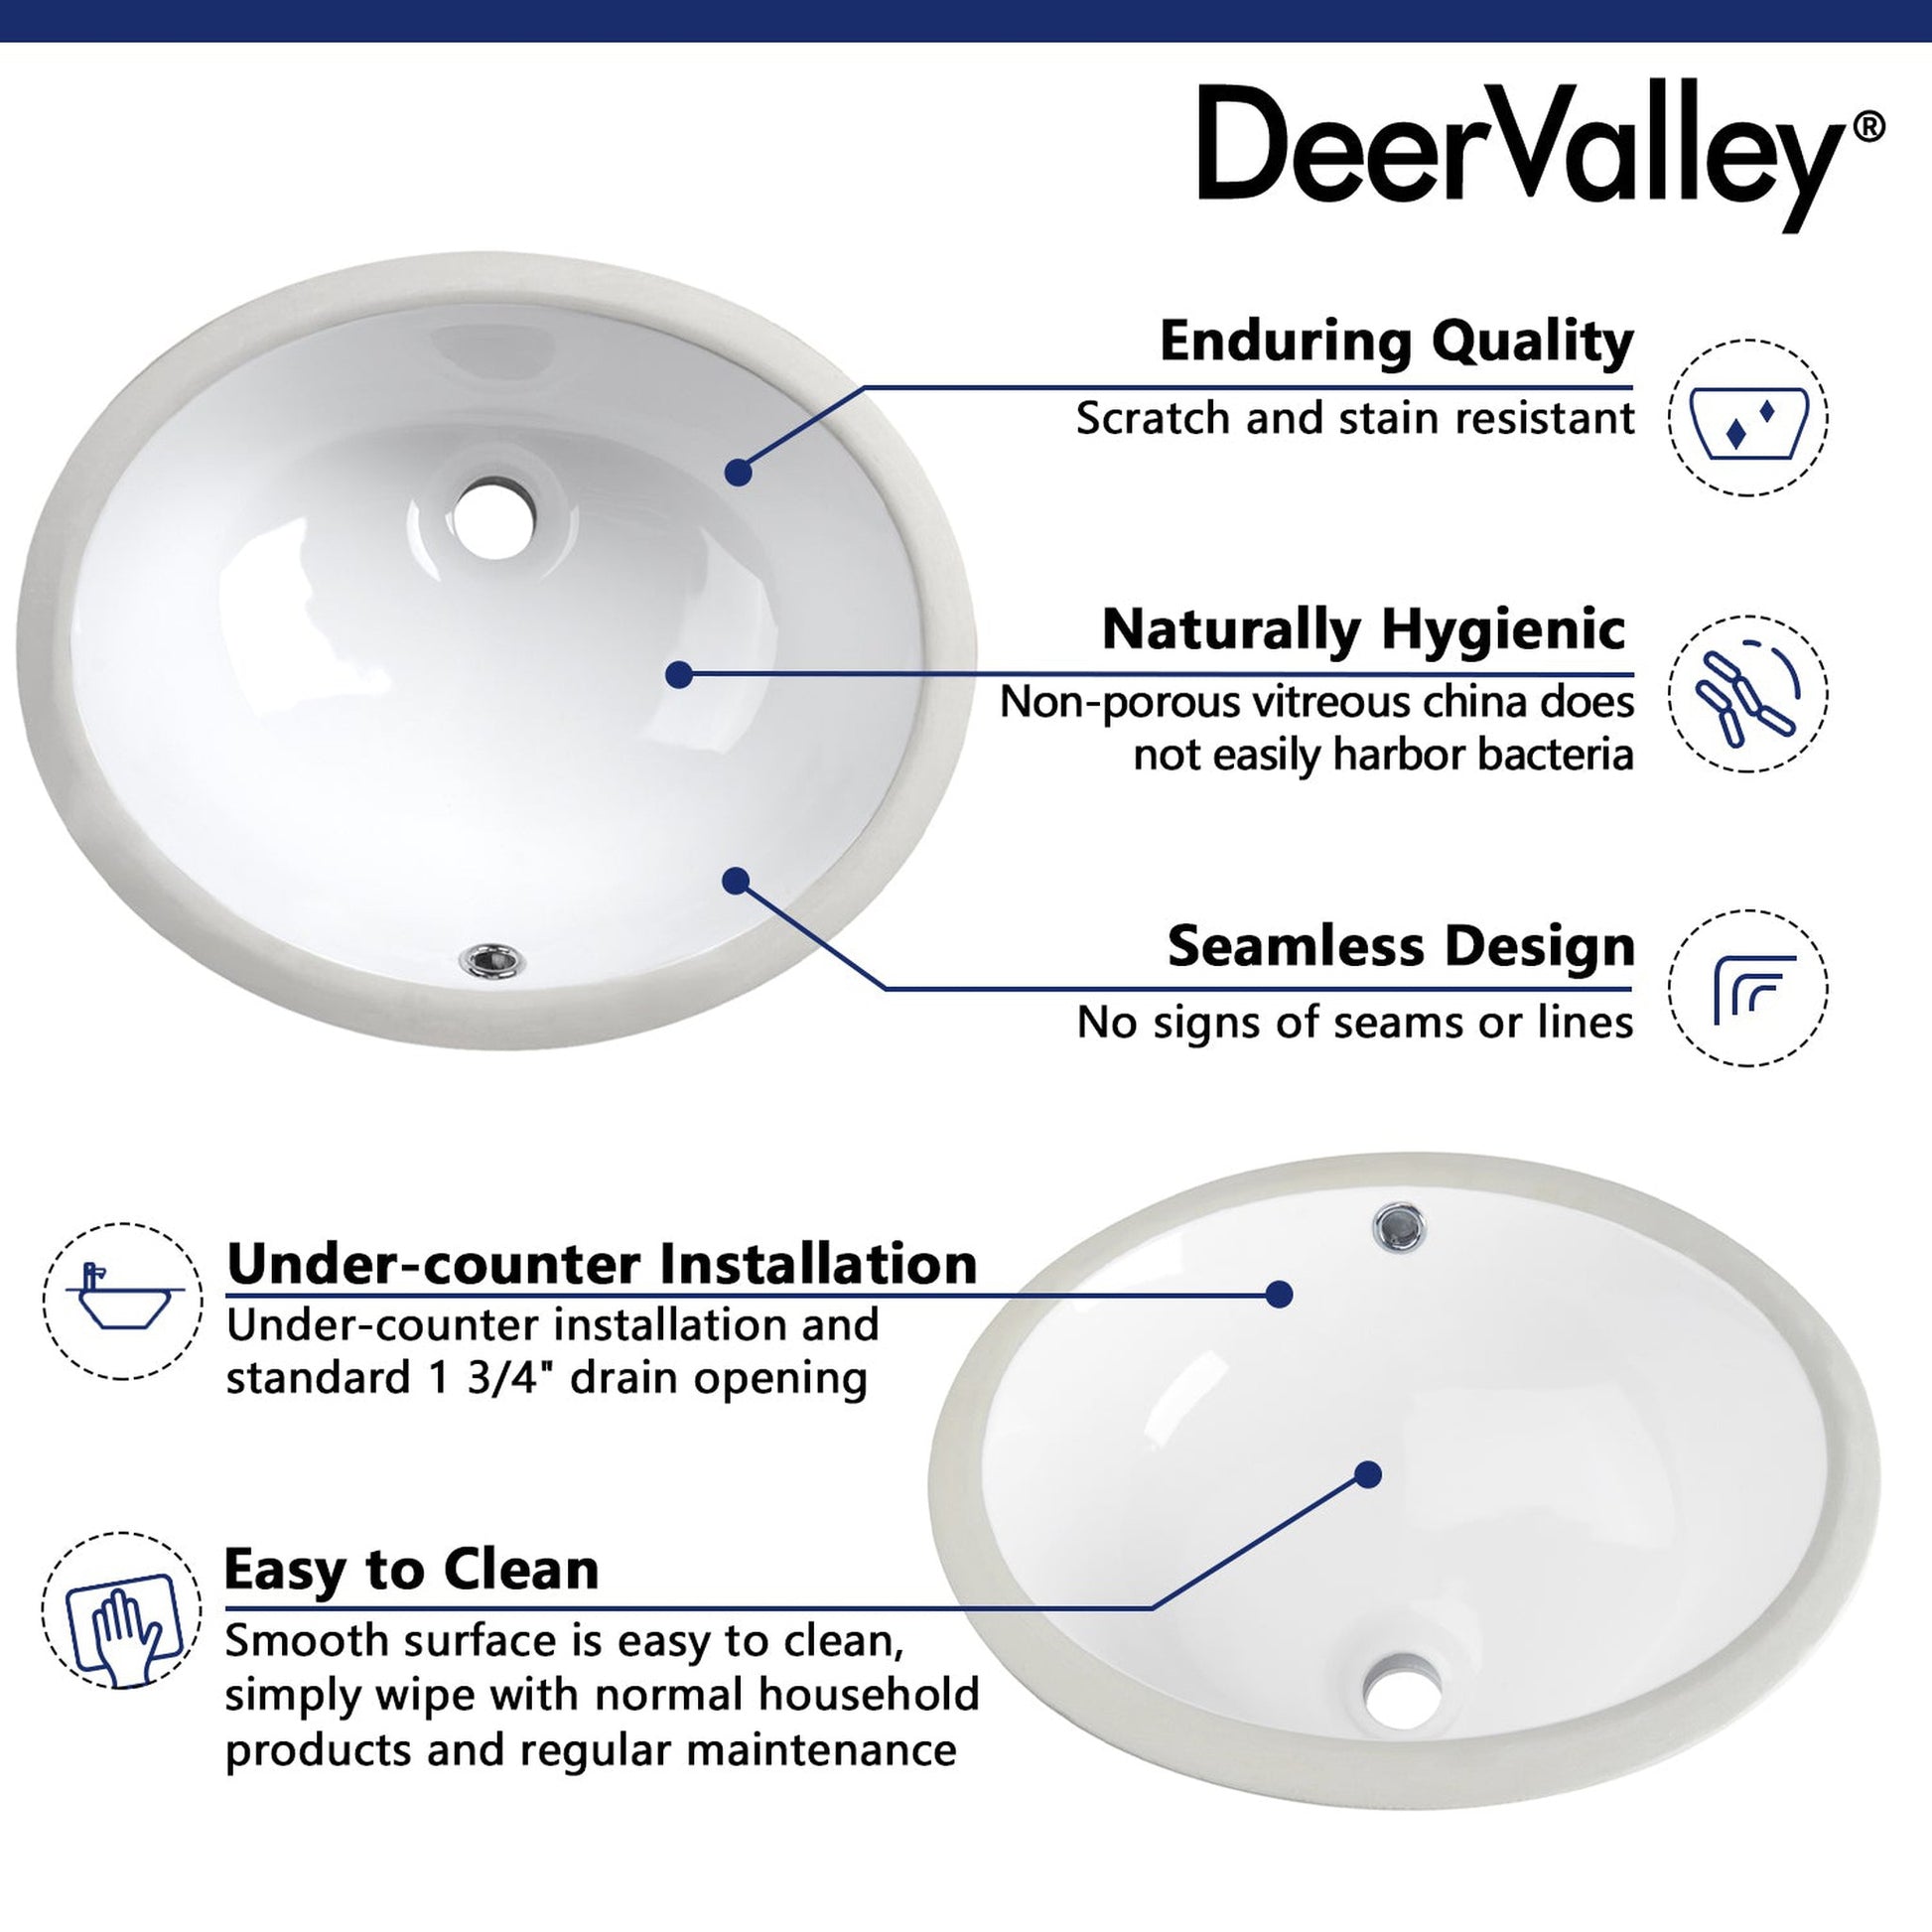 DeerValley Liberty 17" x 14" Oval White Undermount Bathroom Sink With Overflow Hole